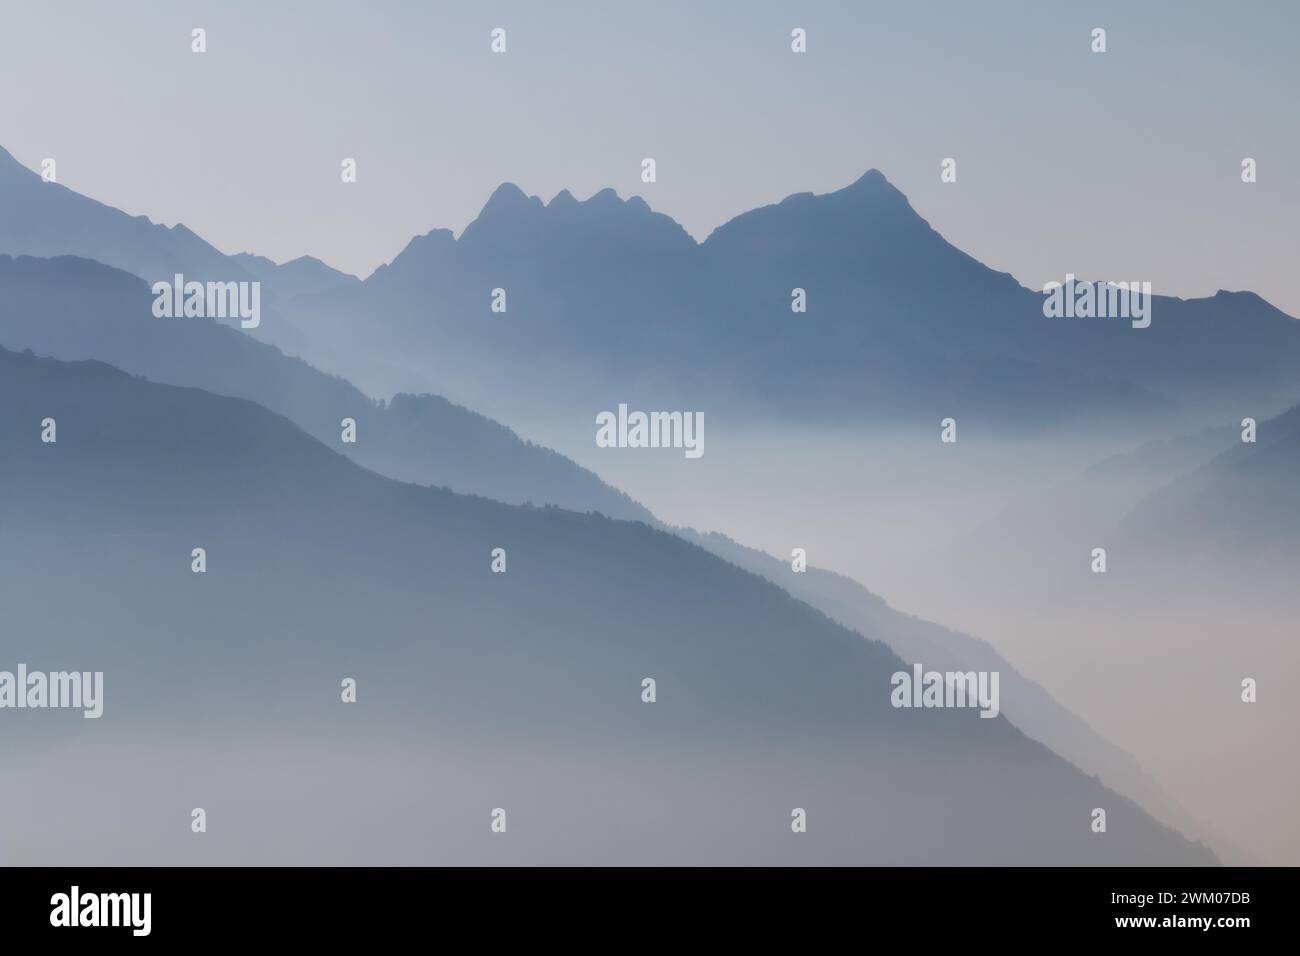 Spectacular mountain ranges silhouettes in shade of grey. Stock Photo